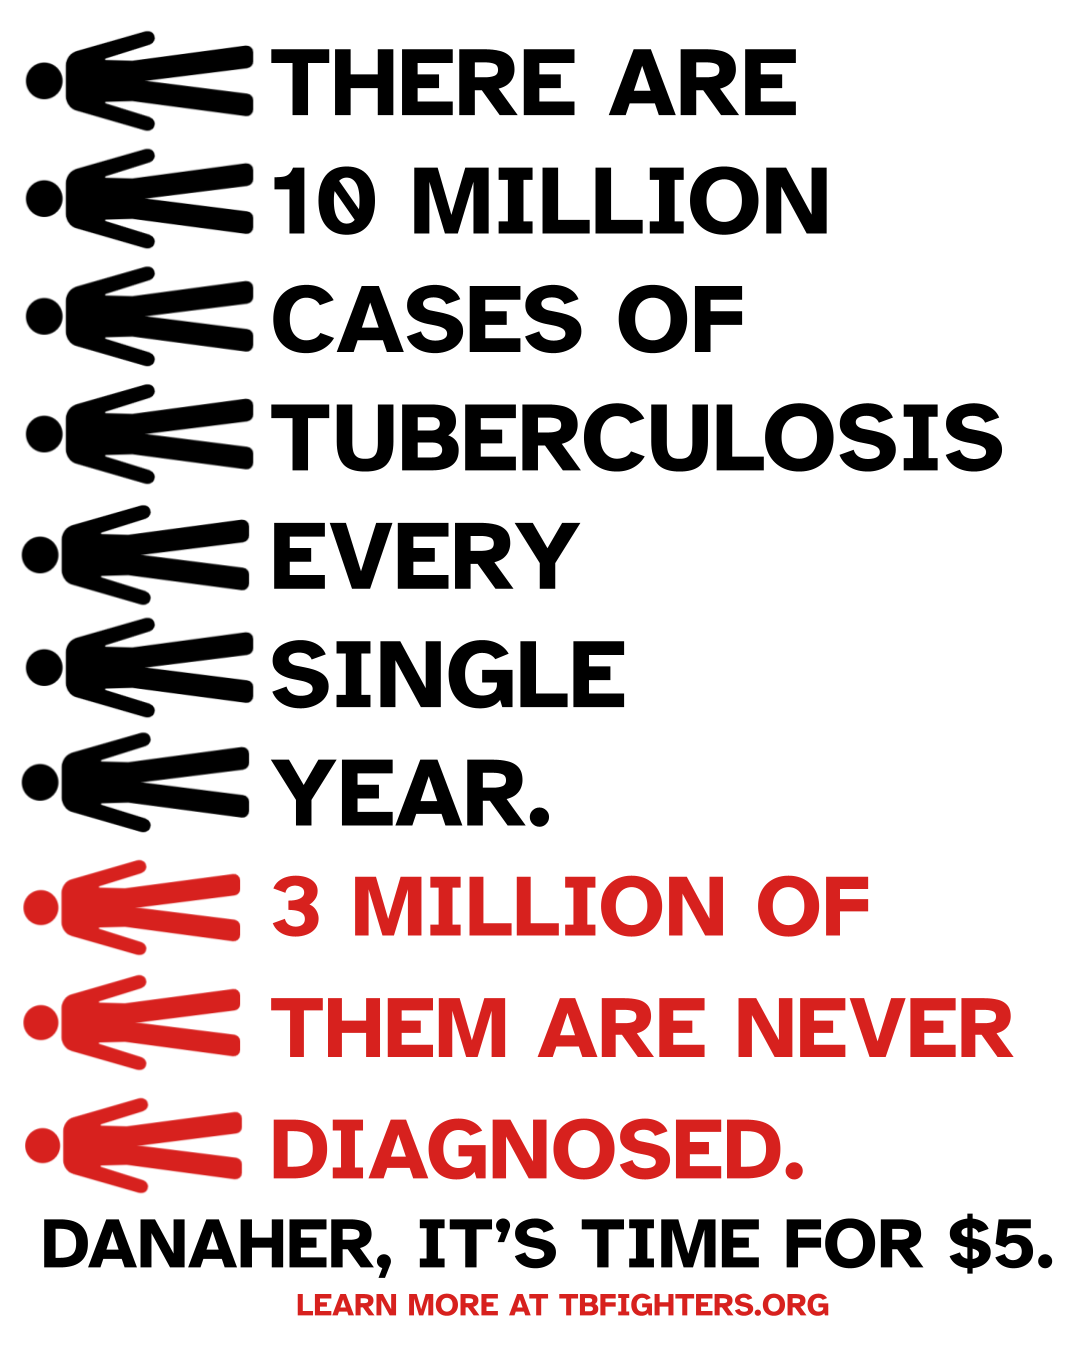 10 stick figures are placed horizontally at the left side on a white background. The first 7 are black and the last three are red. Written next to the black ones, also in black: There are 10 million cases of tuberculosis every single year. In red, next to the last three: 3 million of them are never diagnosed. Footer: Danaher, it’s time for $5. Learn more at tbfighters.org